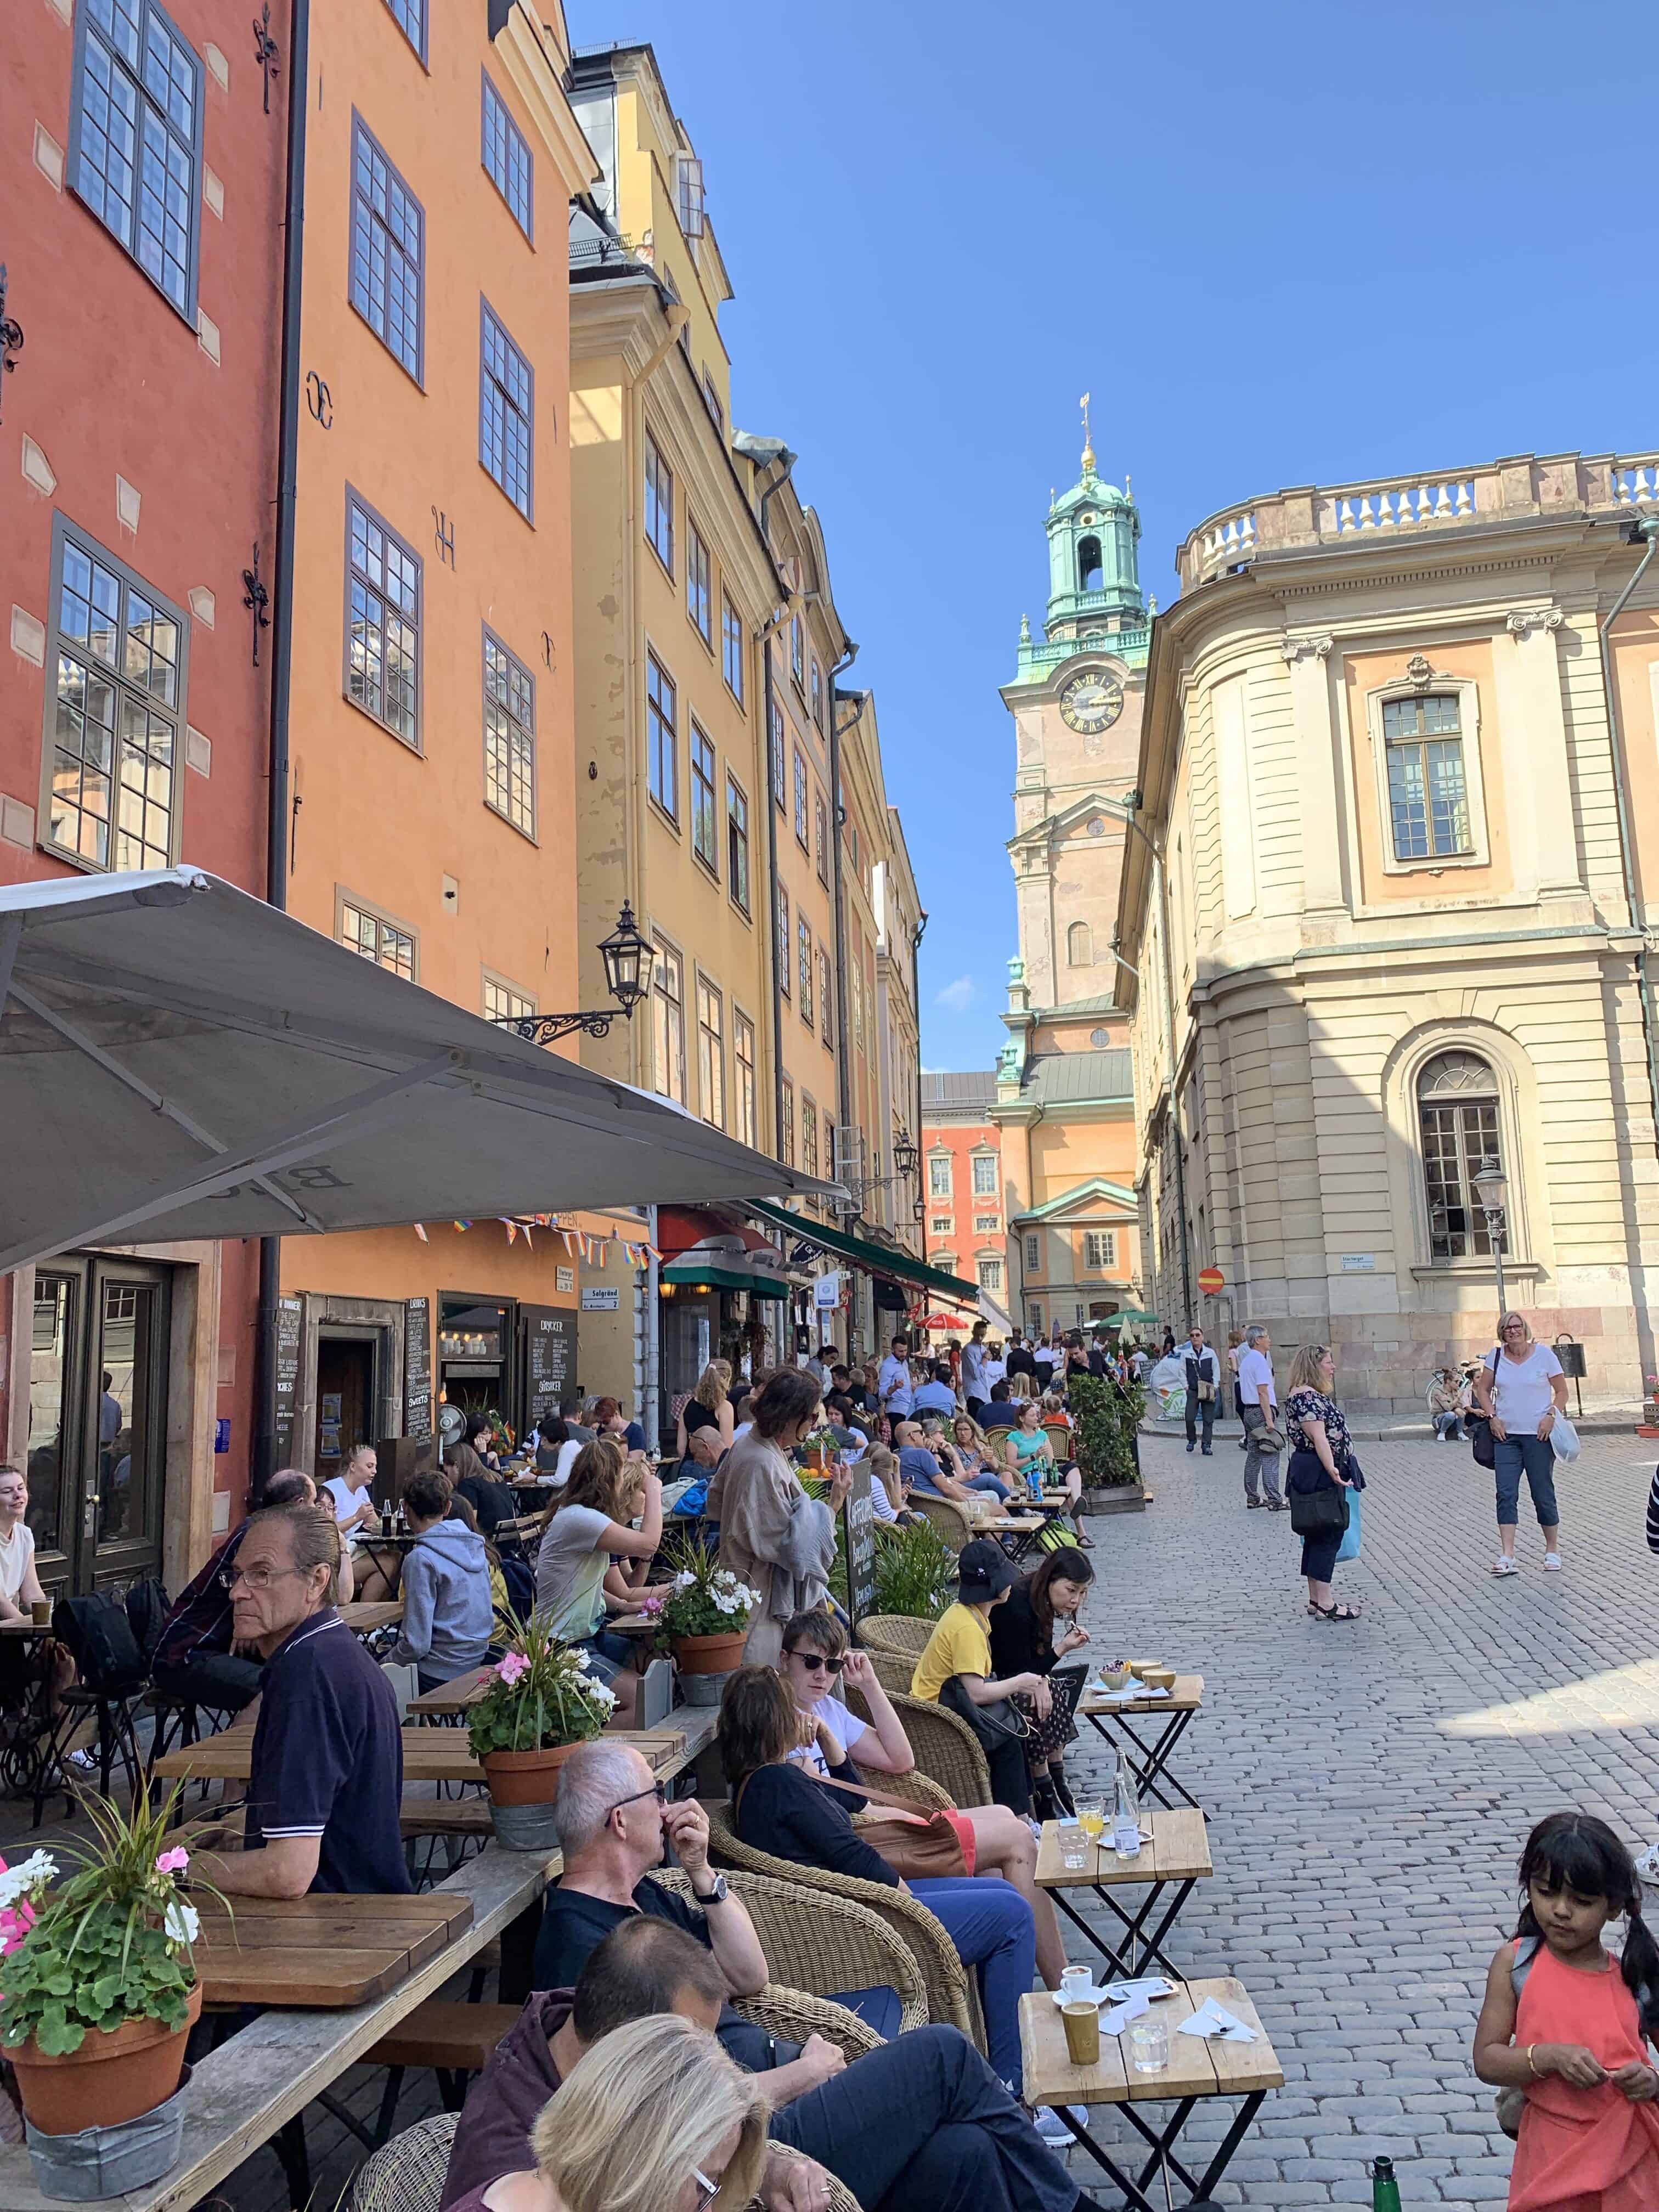 Beyond Ikea & meatballs - How to have an amazing adventure in Stockholm